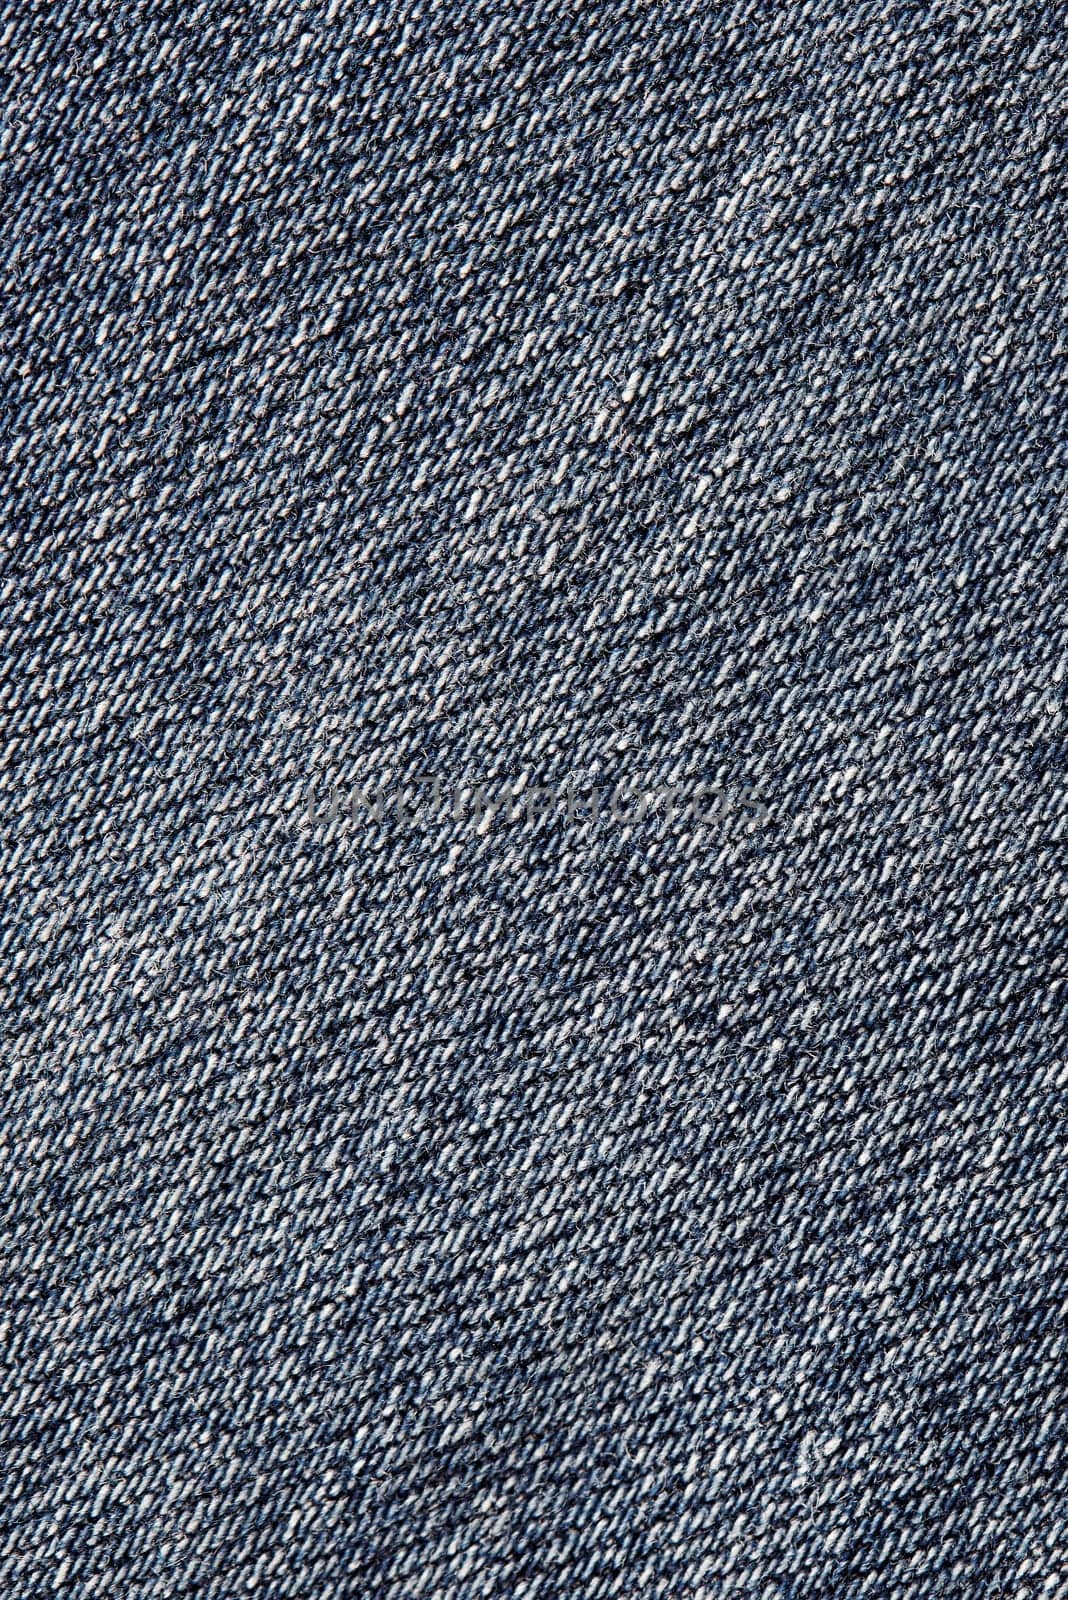 Fabric texture. Blue jeans background and texture. Close up of blue jeans background. Denim texture in high-resolution.